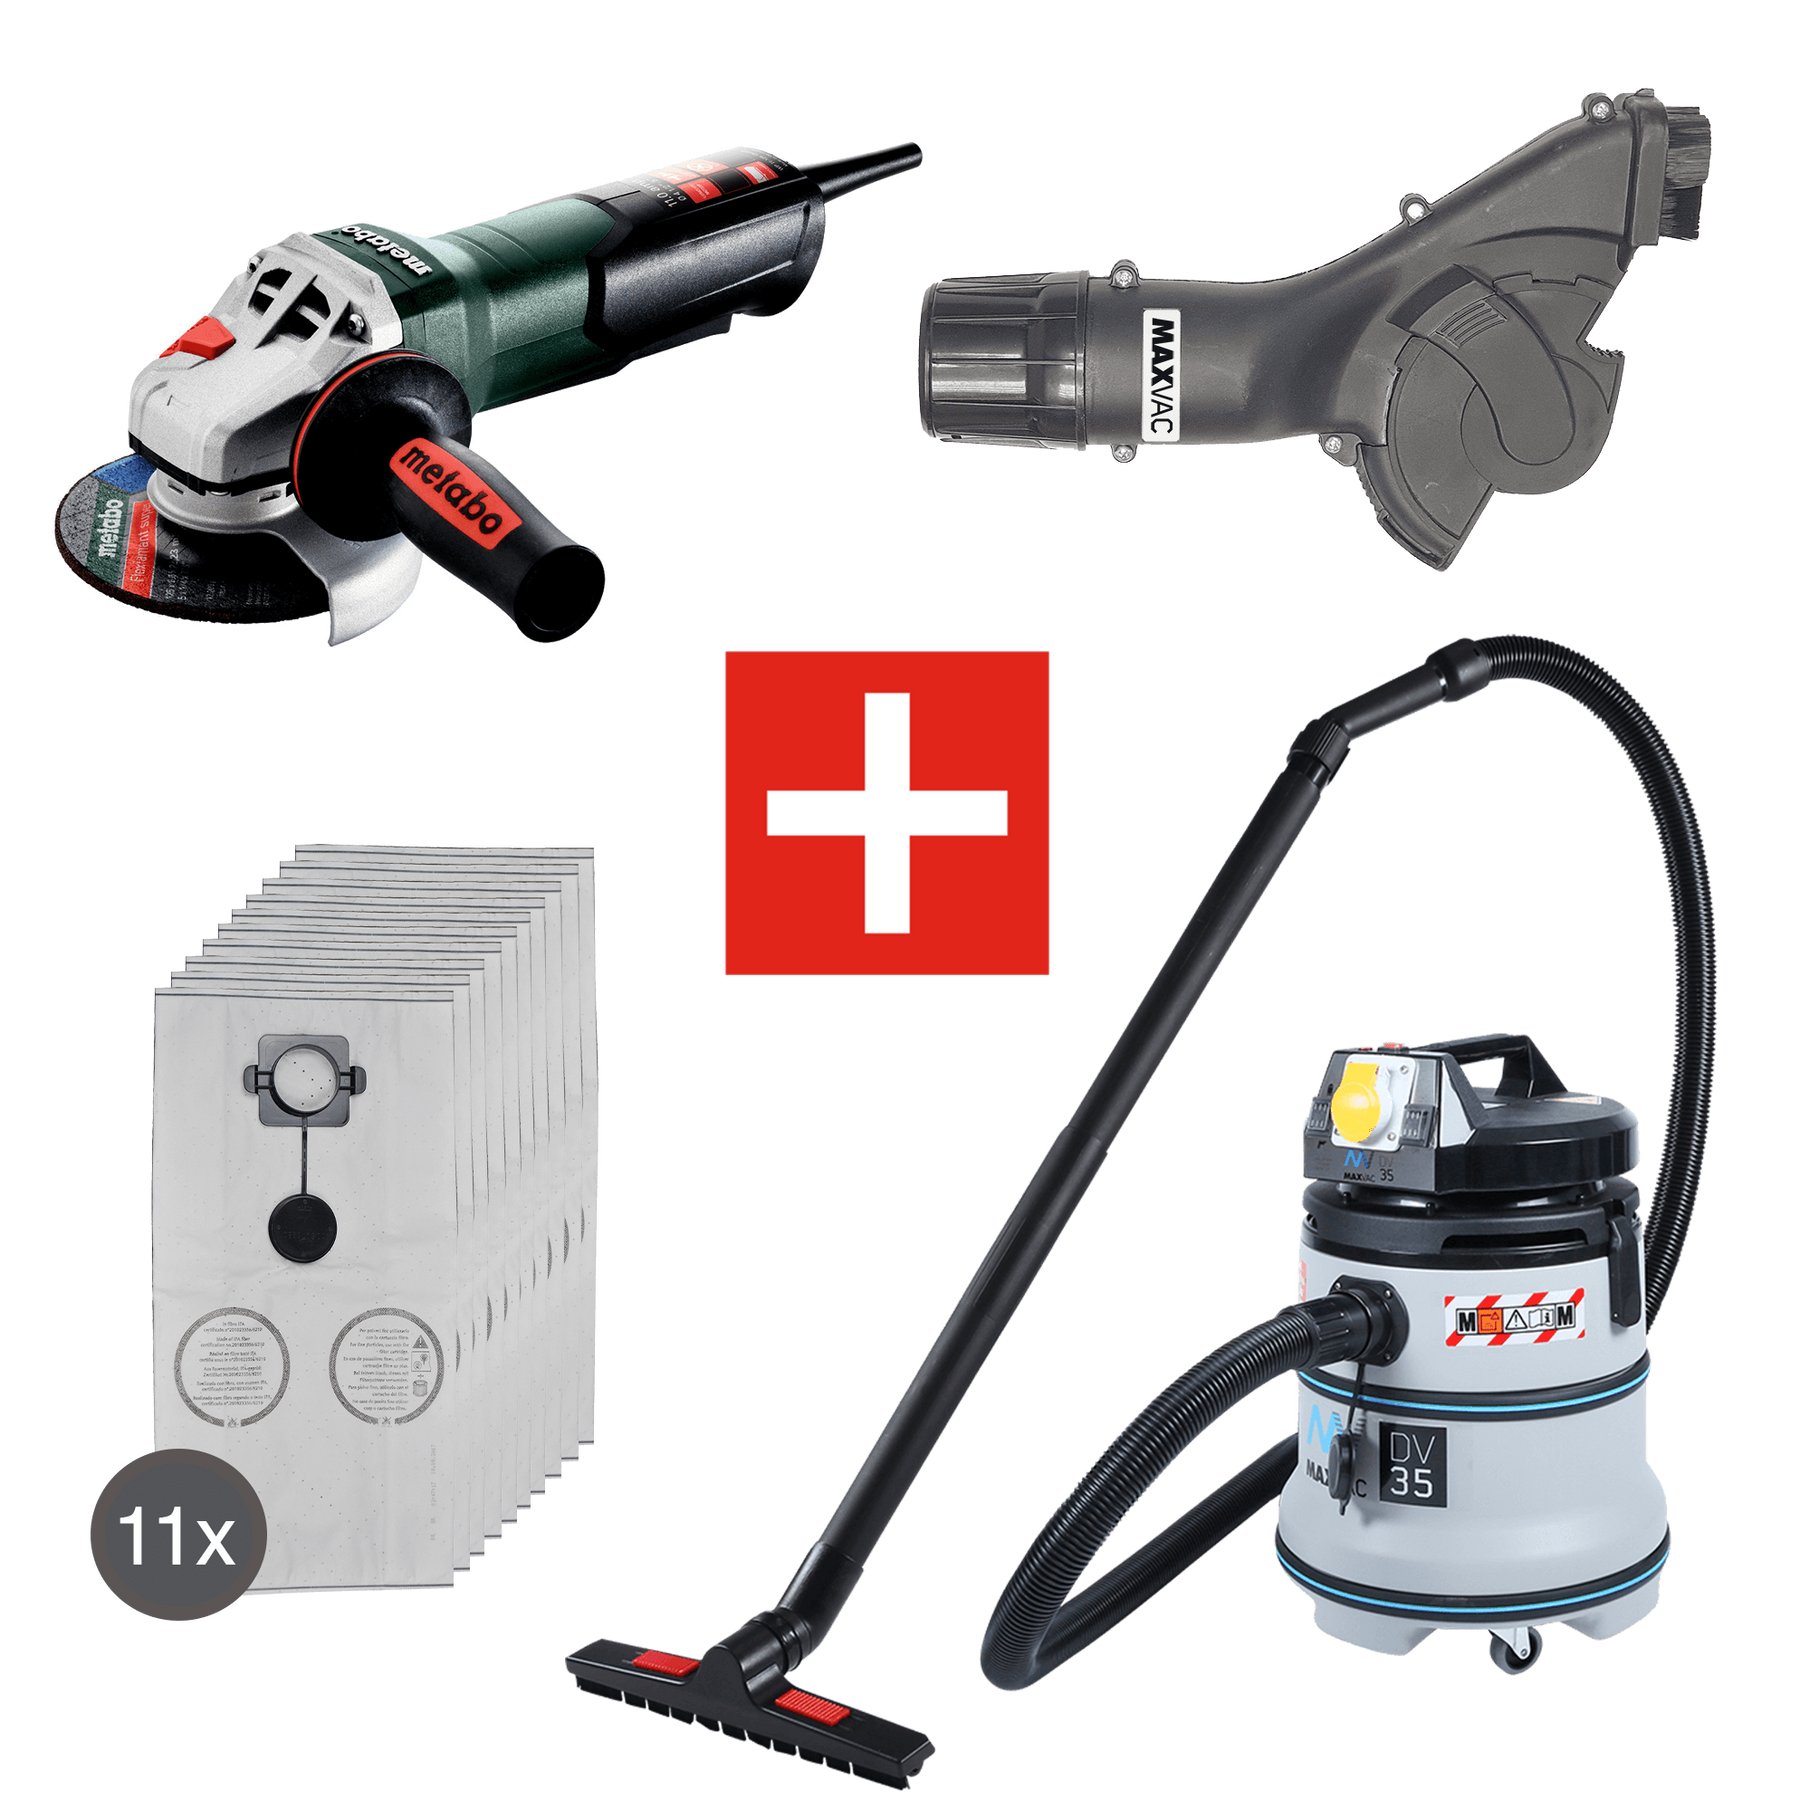 Metabo 4 1/2" (115mm) Angle Grinder, MAXVAC Dust Shroud & DV35-MBA Vacuum Complete Package, Pre-Installed